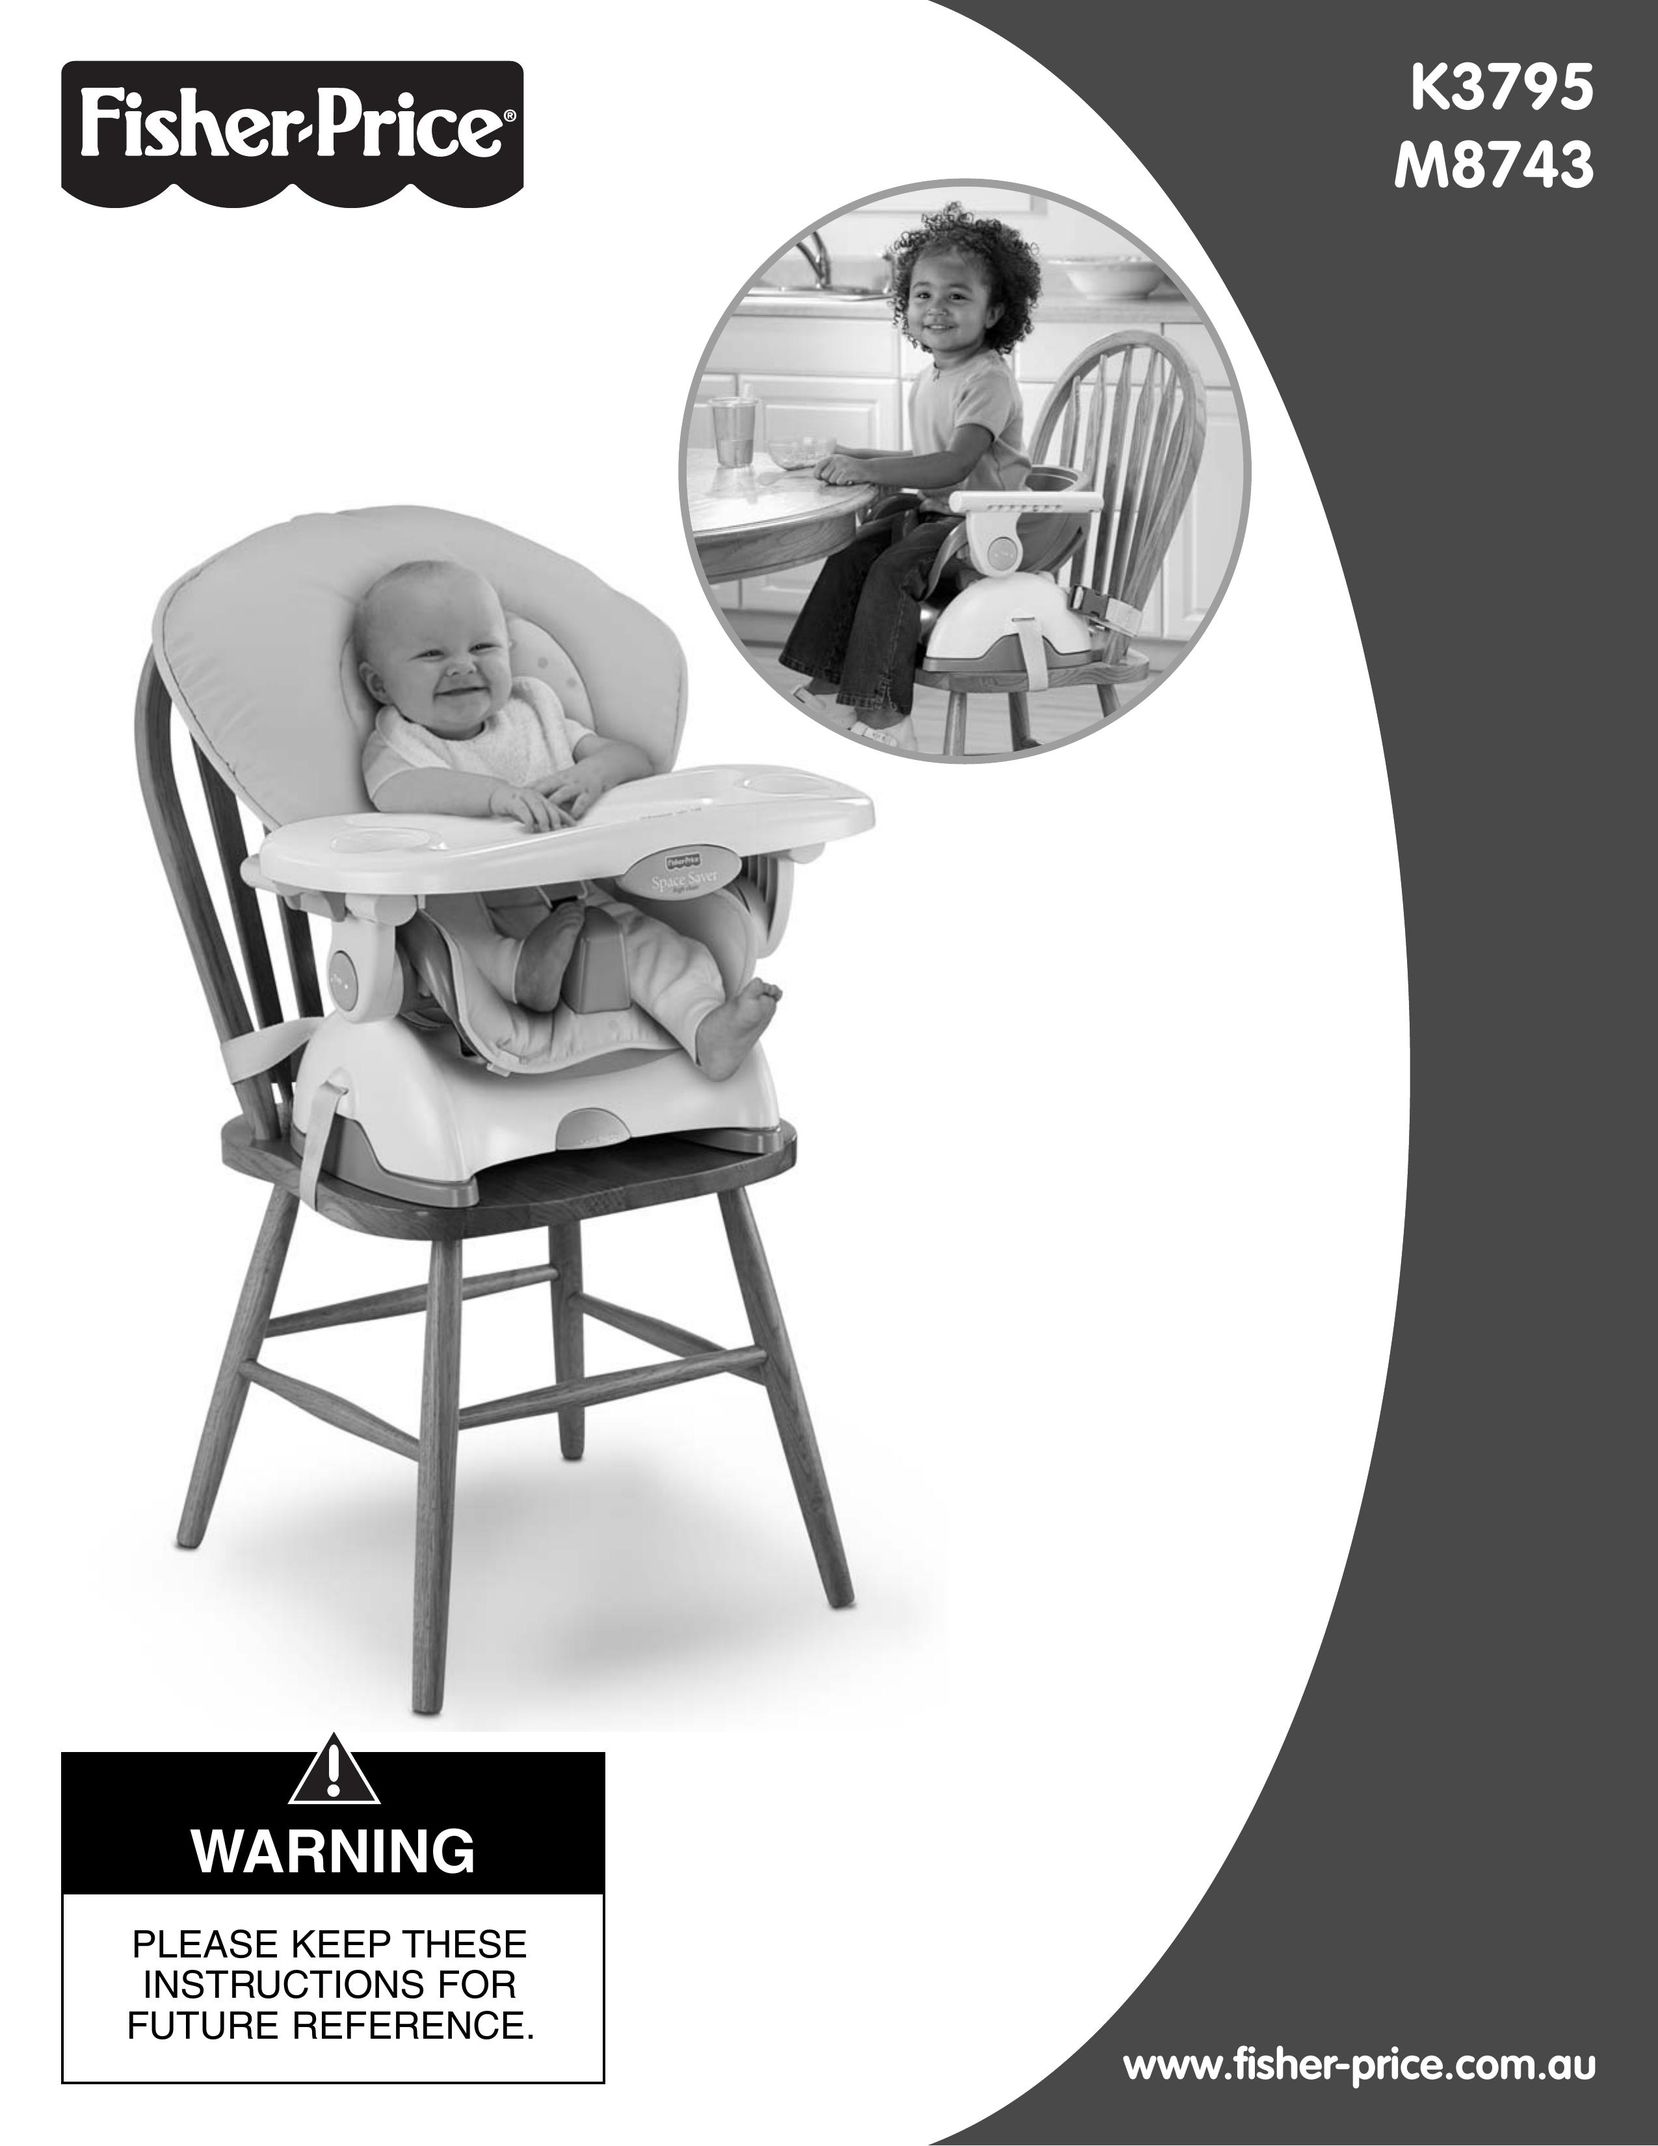 Fisher-Price K3795 High Chair User Manual